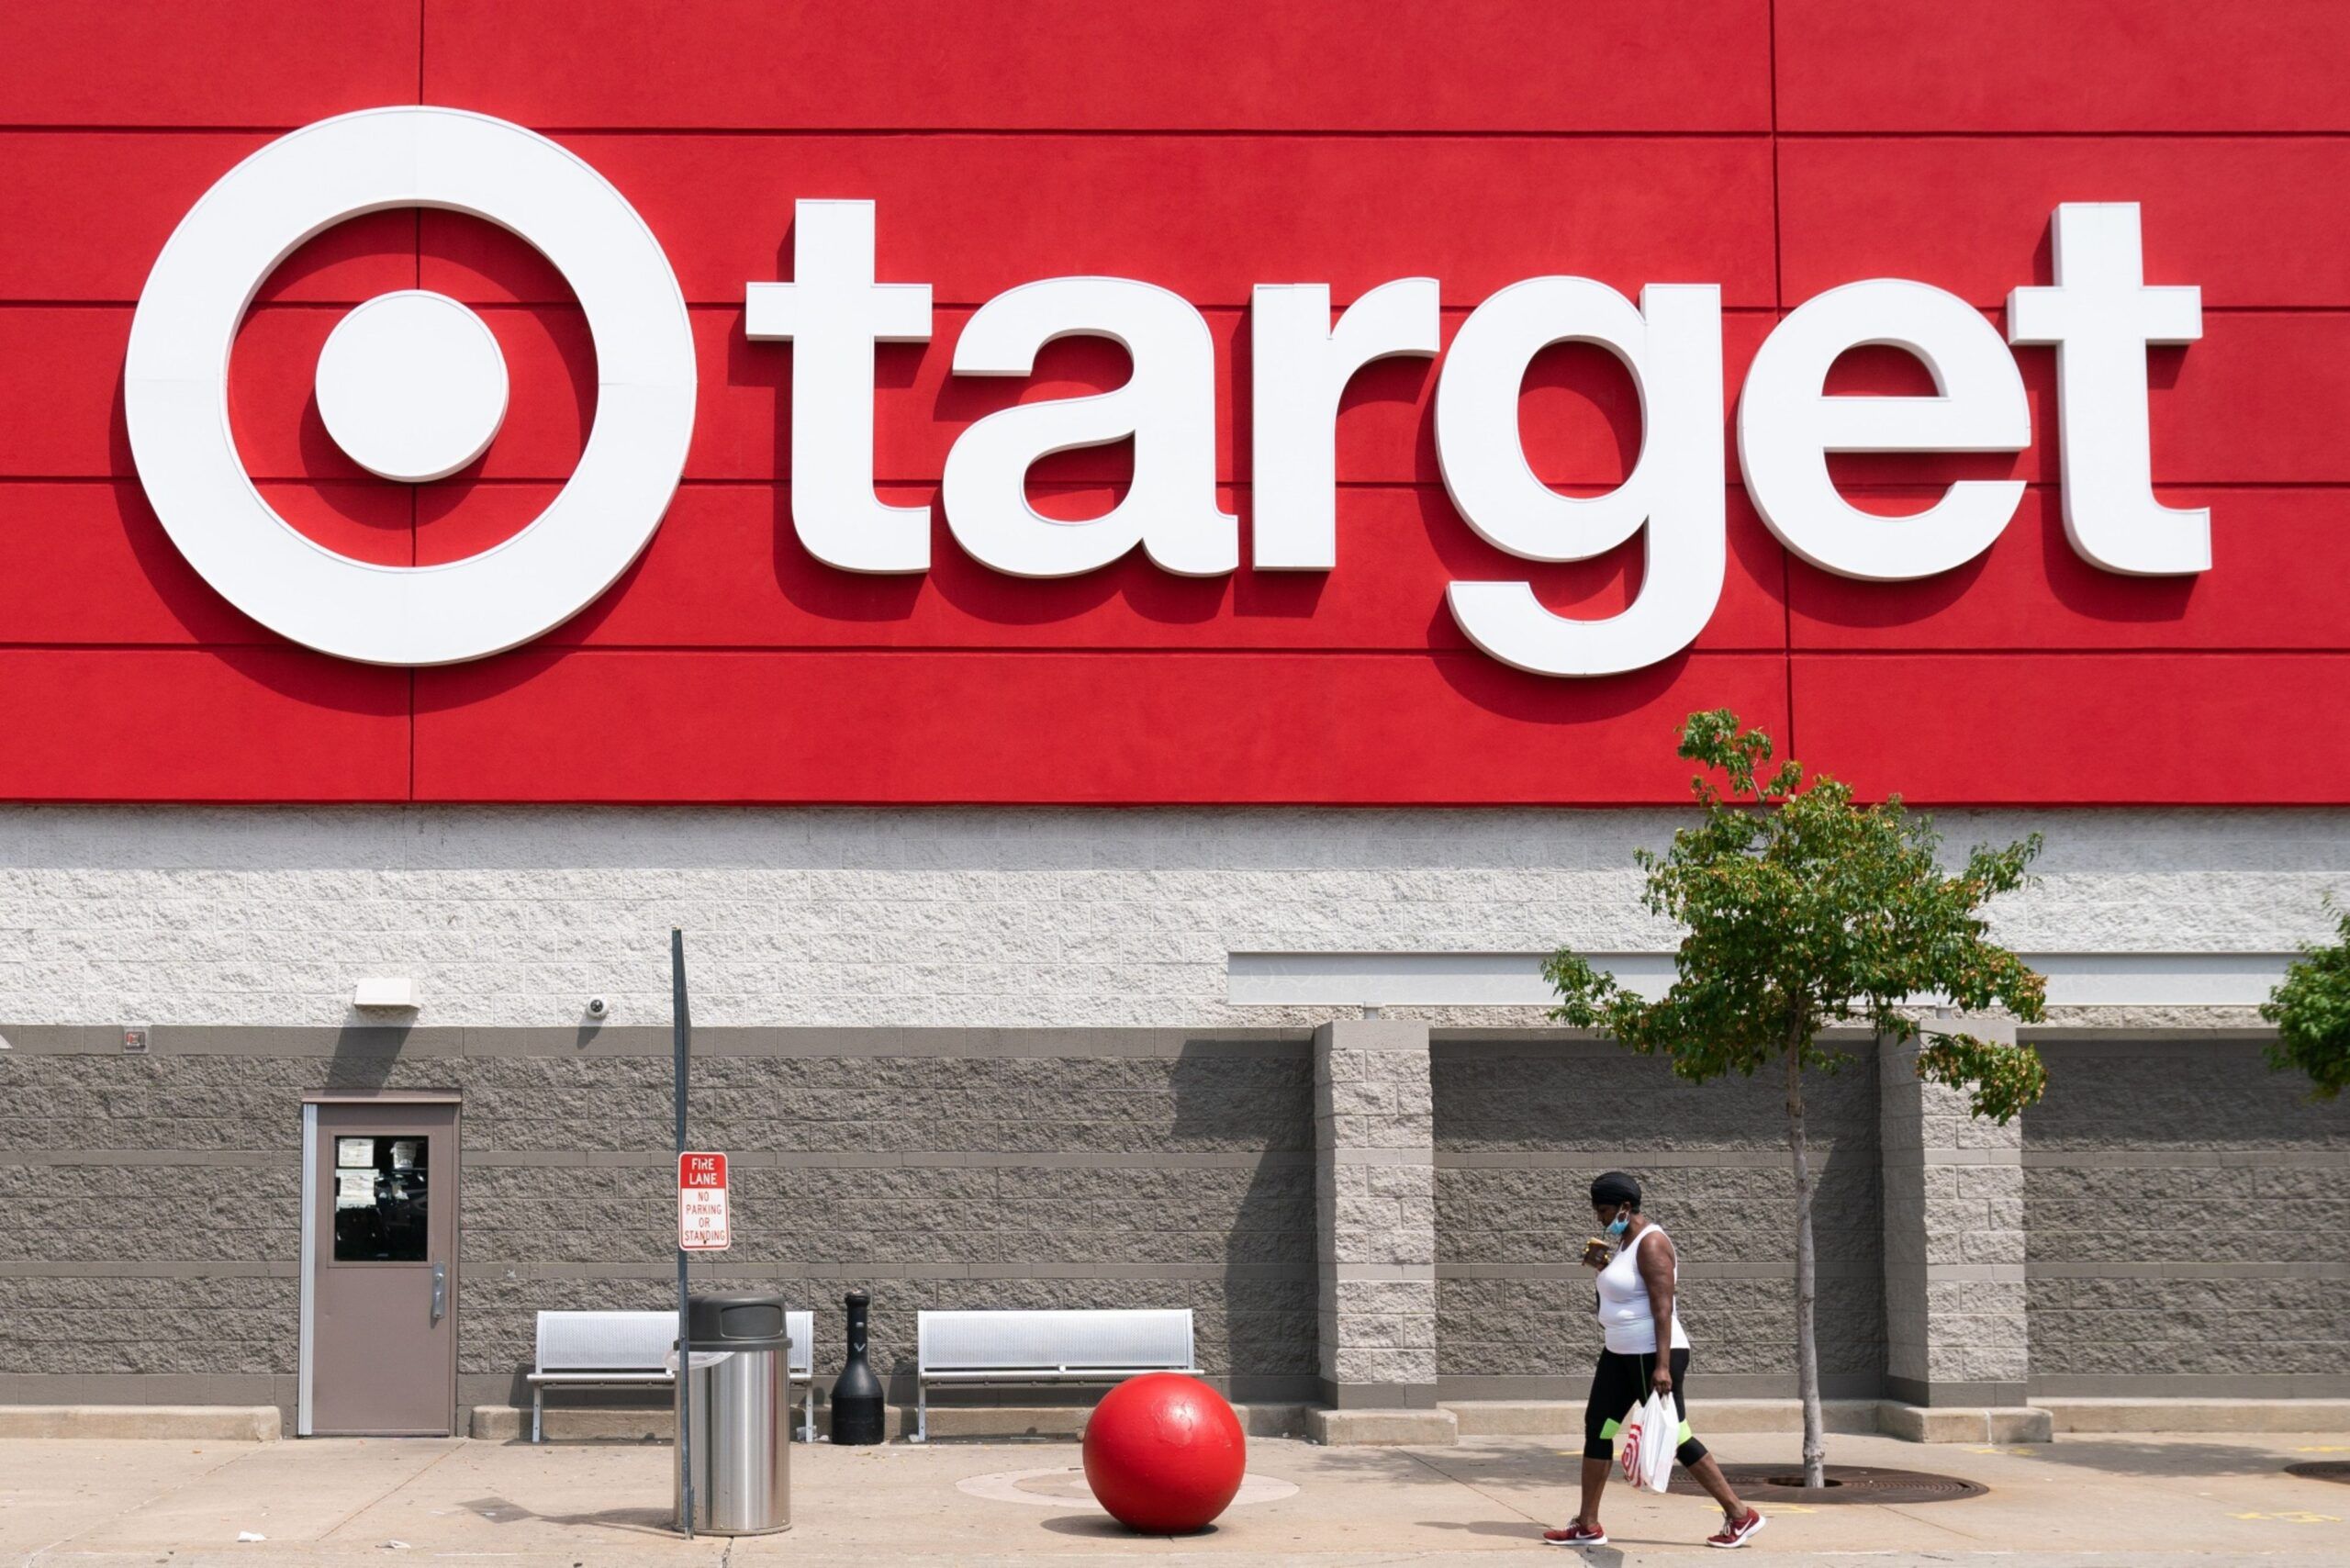 A shopper wearing a protective mask walks past a Target Corp. store in Jersey City, New Jersey, U.S., on Friday, Aug. 14, 2020. Target is scheduled to release earnings figures on August 19. Photographer: Jeenah Moon/Bloomberg